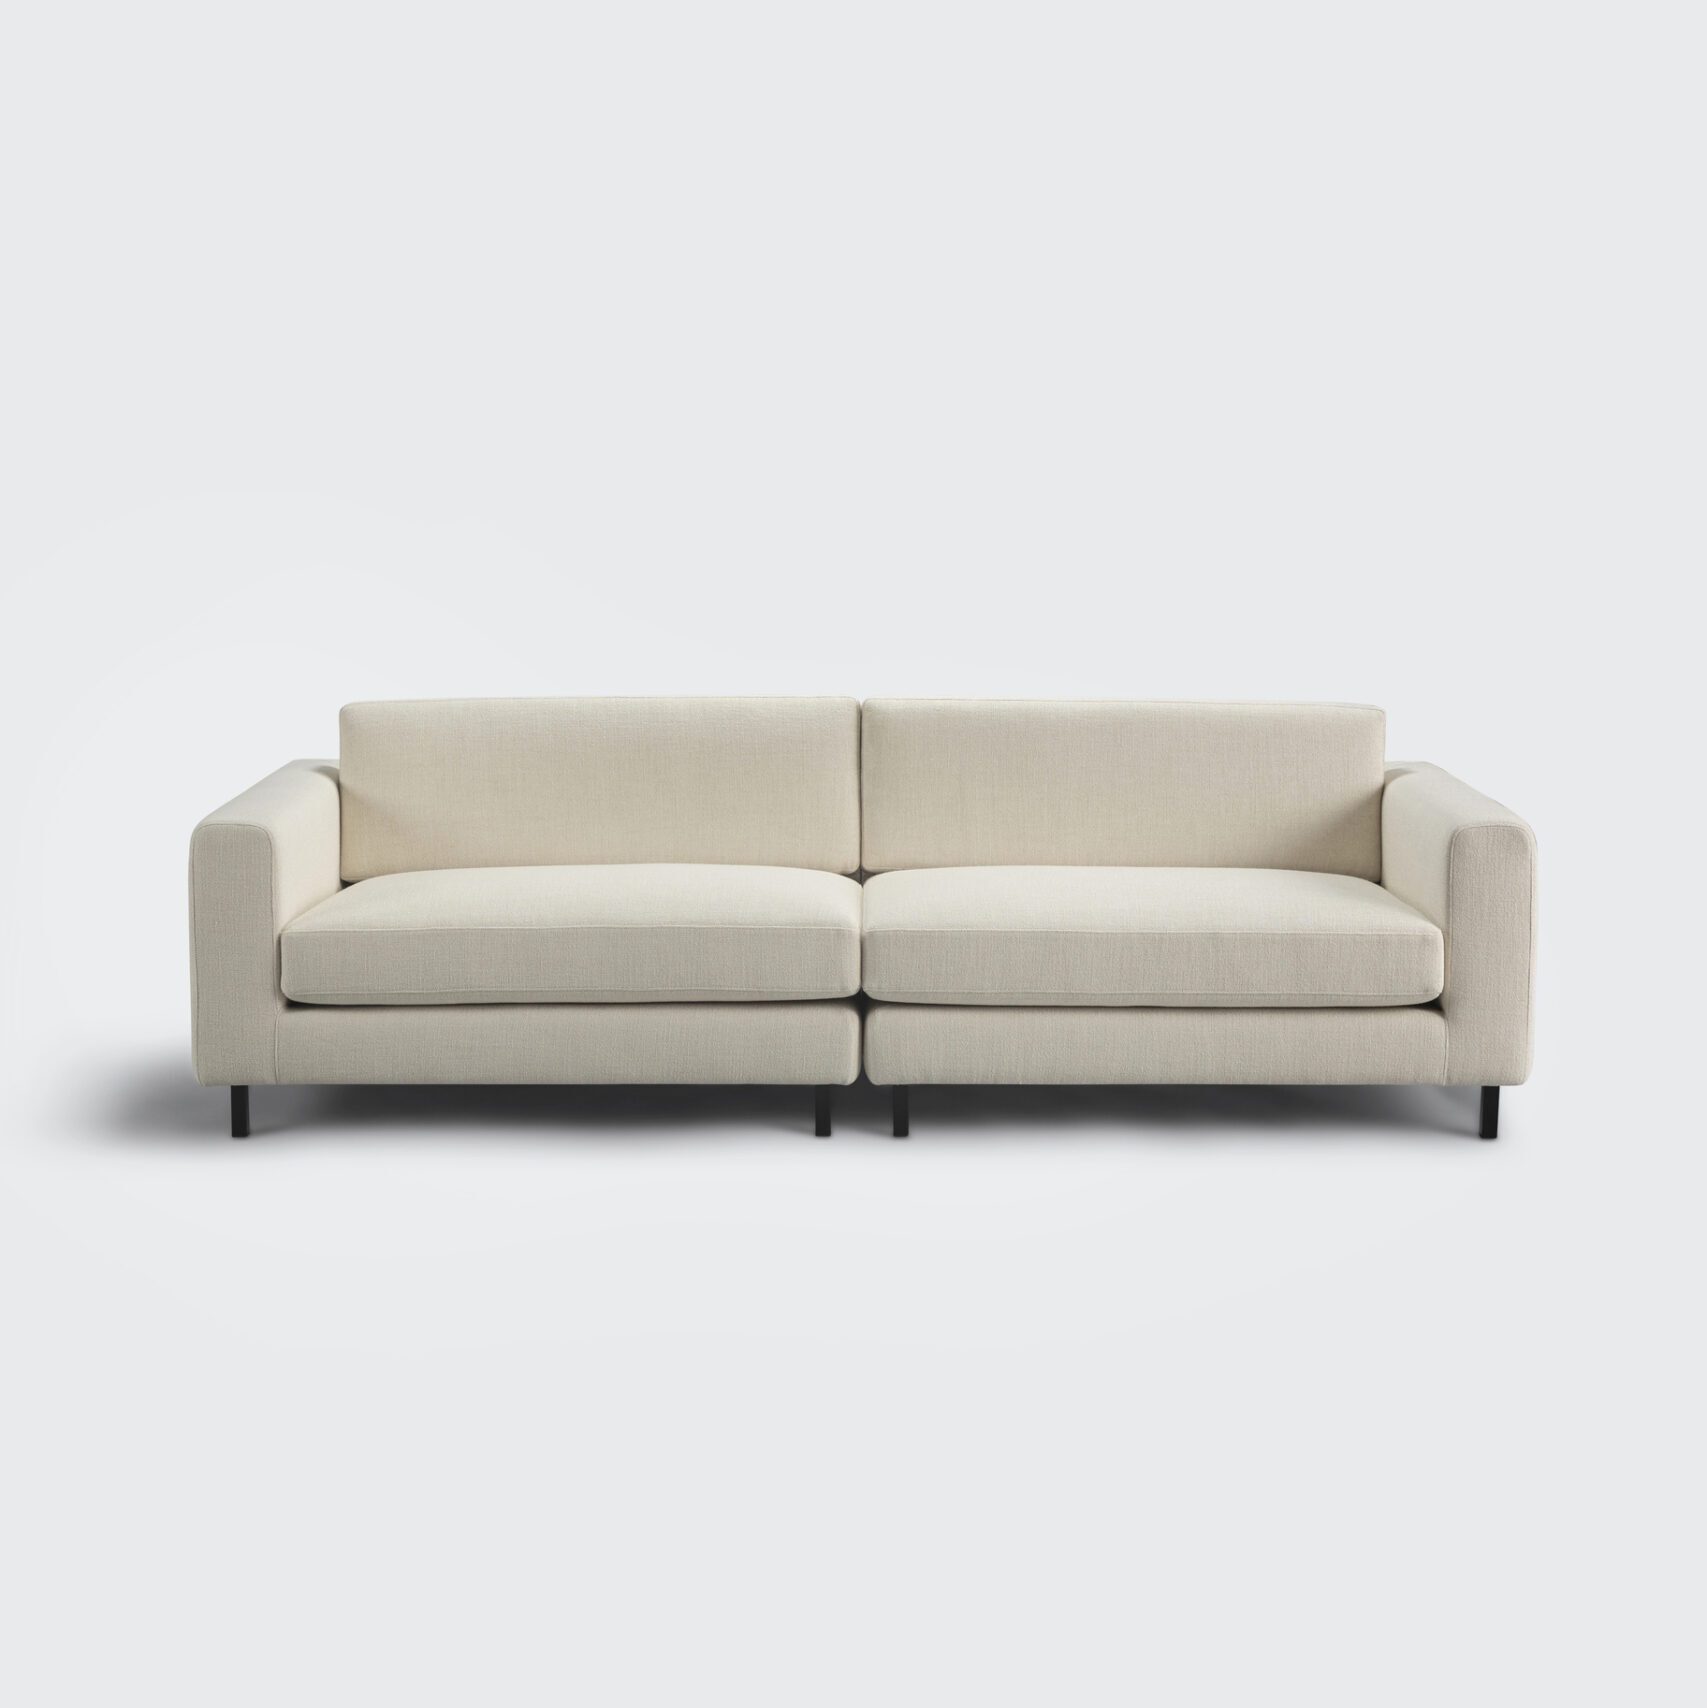 SAV sofa timeless 260 cream interior design architecture product furniture luxury_resistant style living room noble lined 260cm decor two separated modules timeless collection